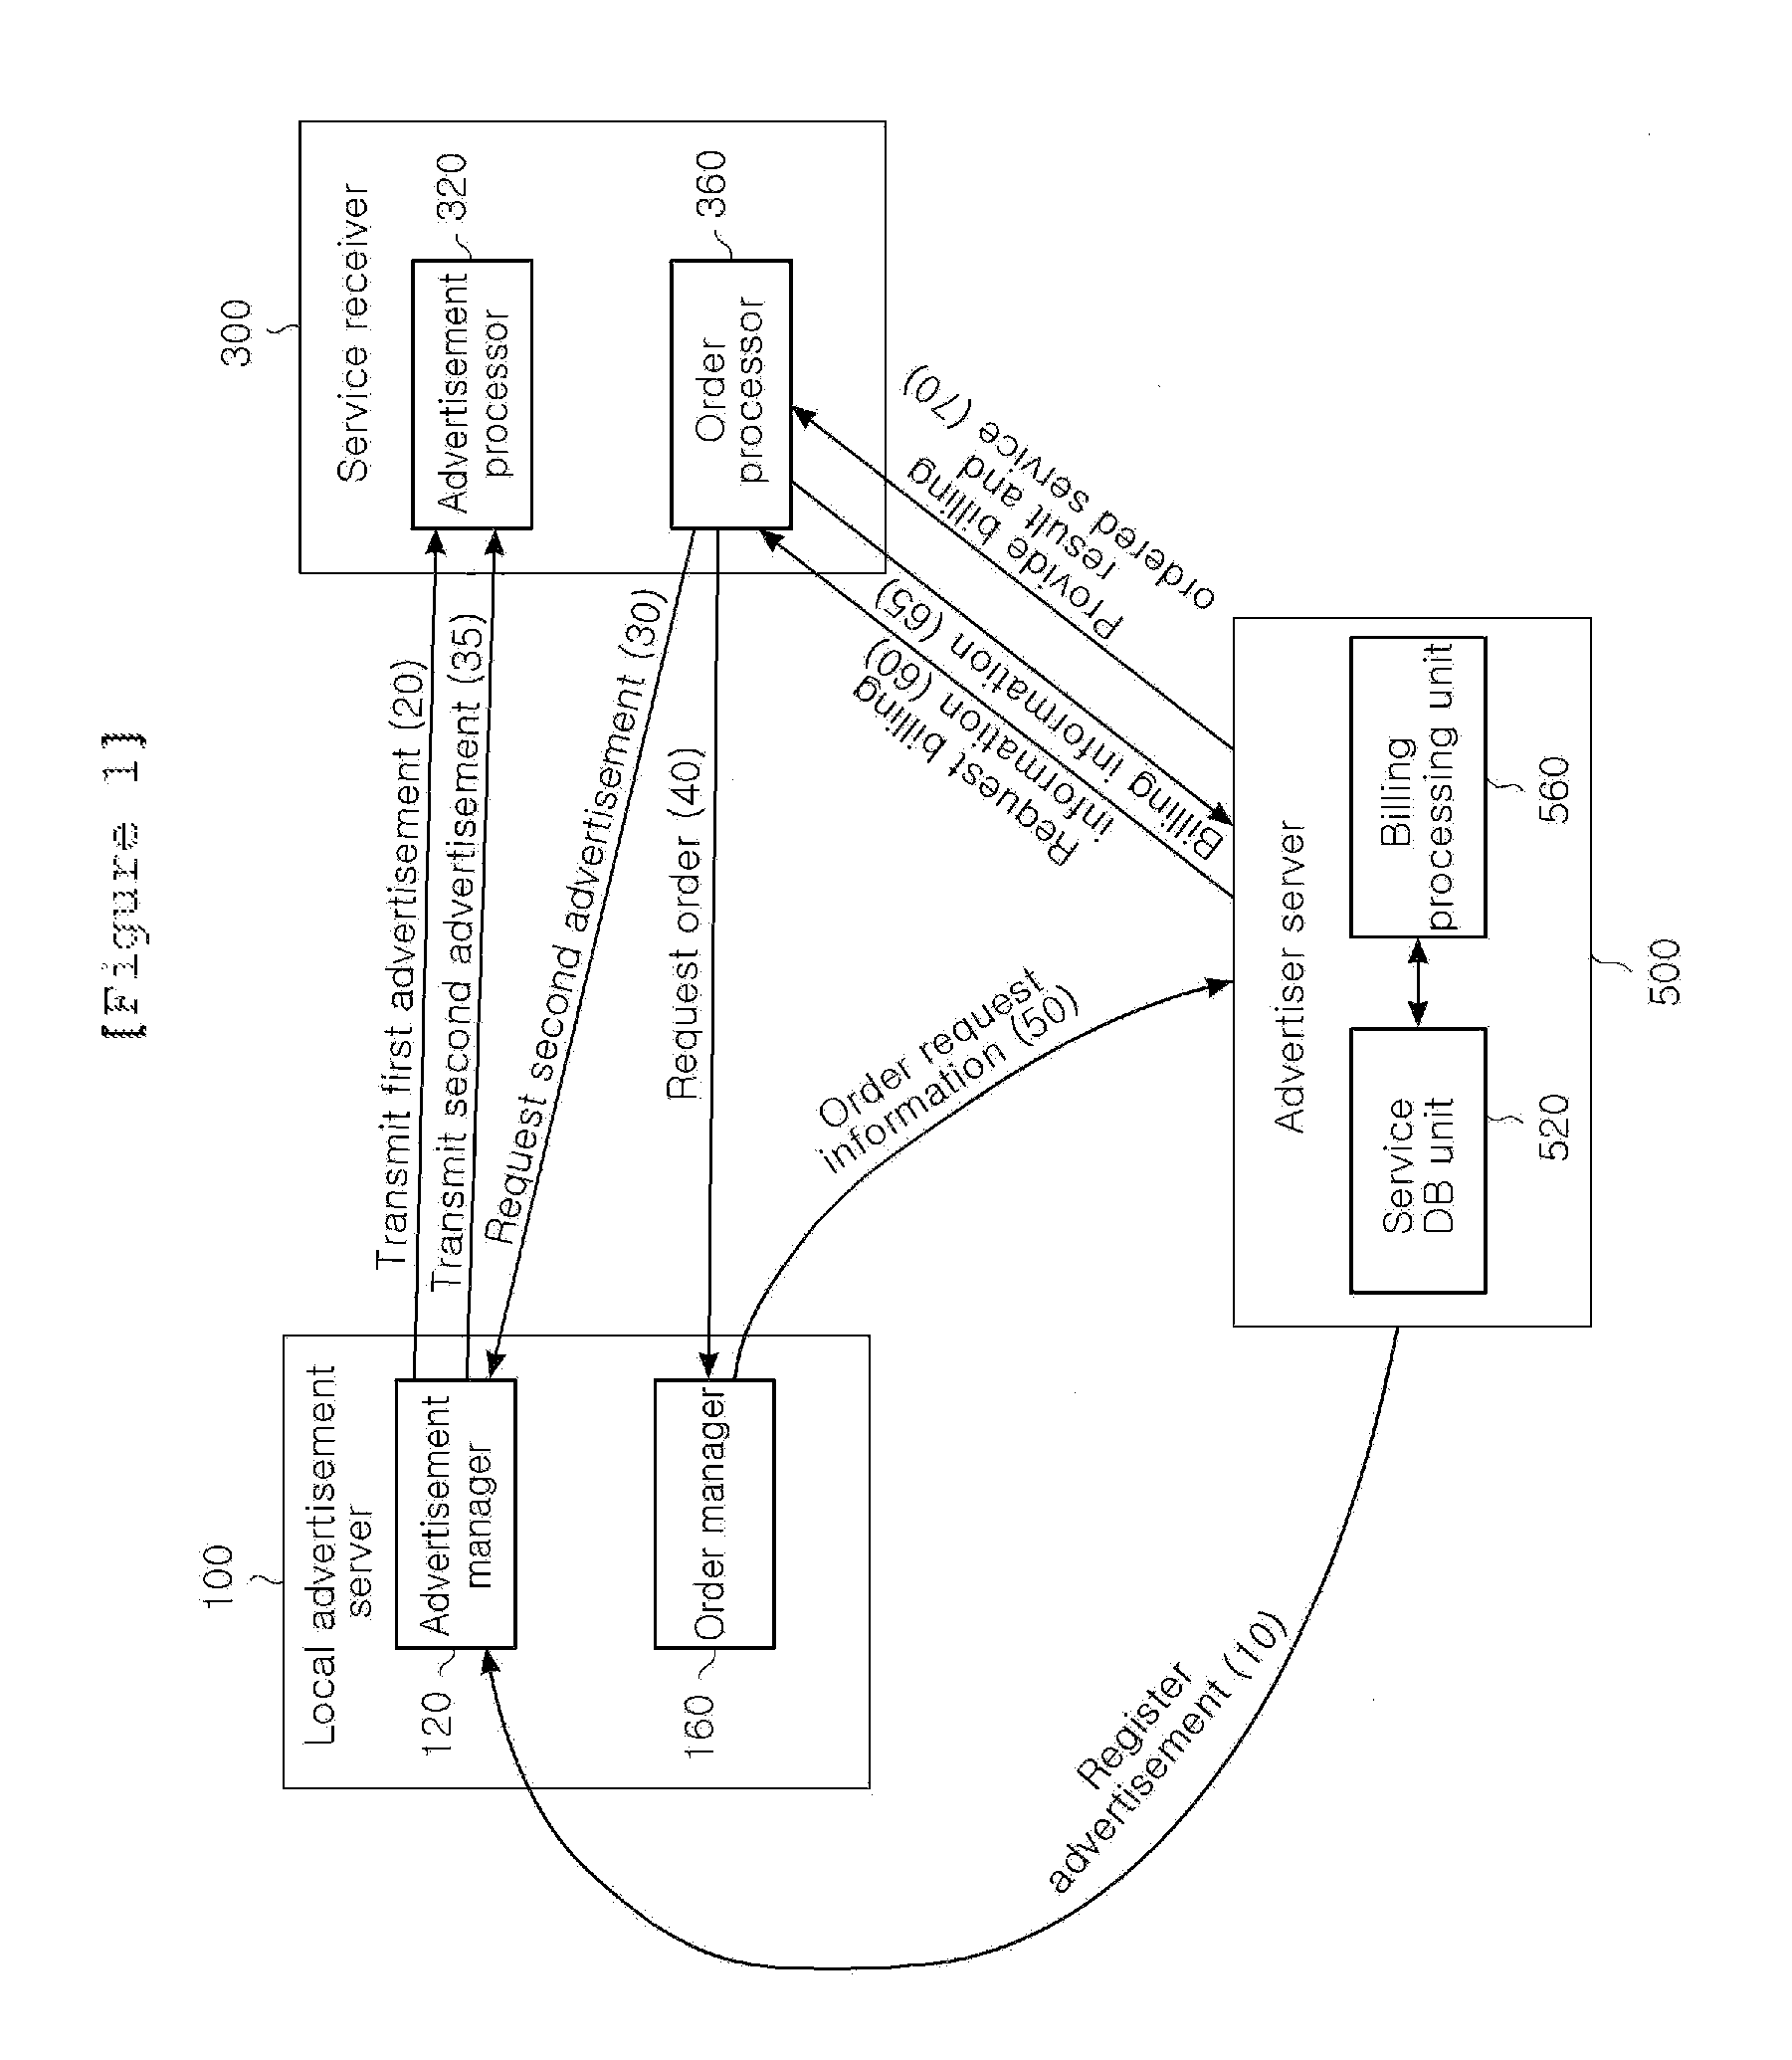 System and method of interactive area advertisement using multicast transmitting